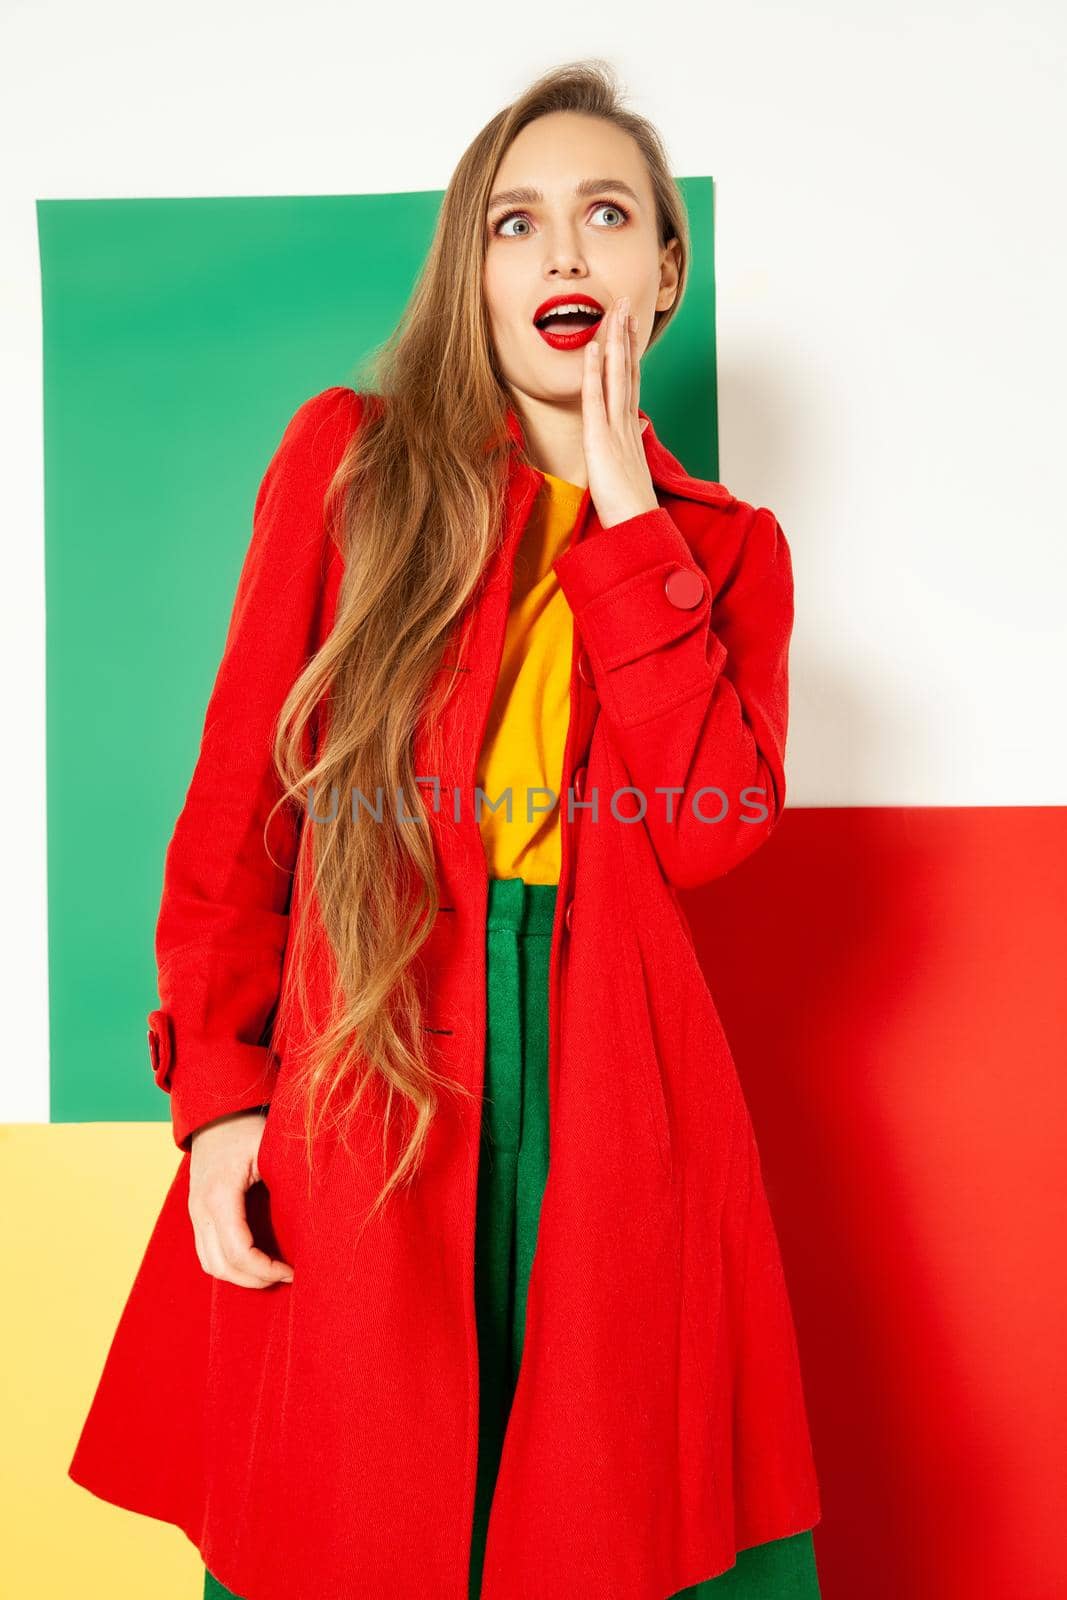 Surprised young fashionable female model in vivid red coat over yellow and green clothes touching cheek and looking away with amazement